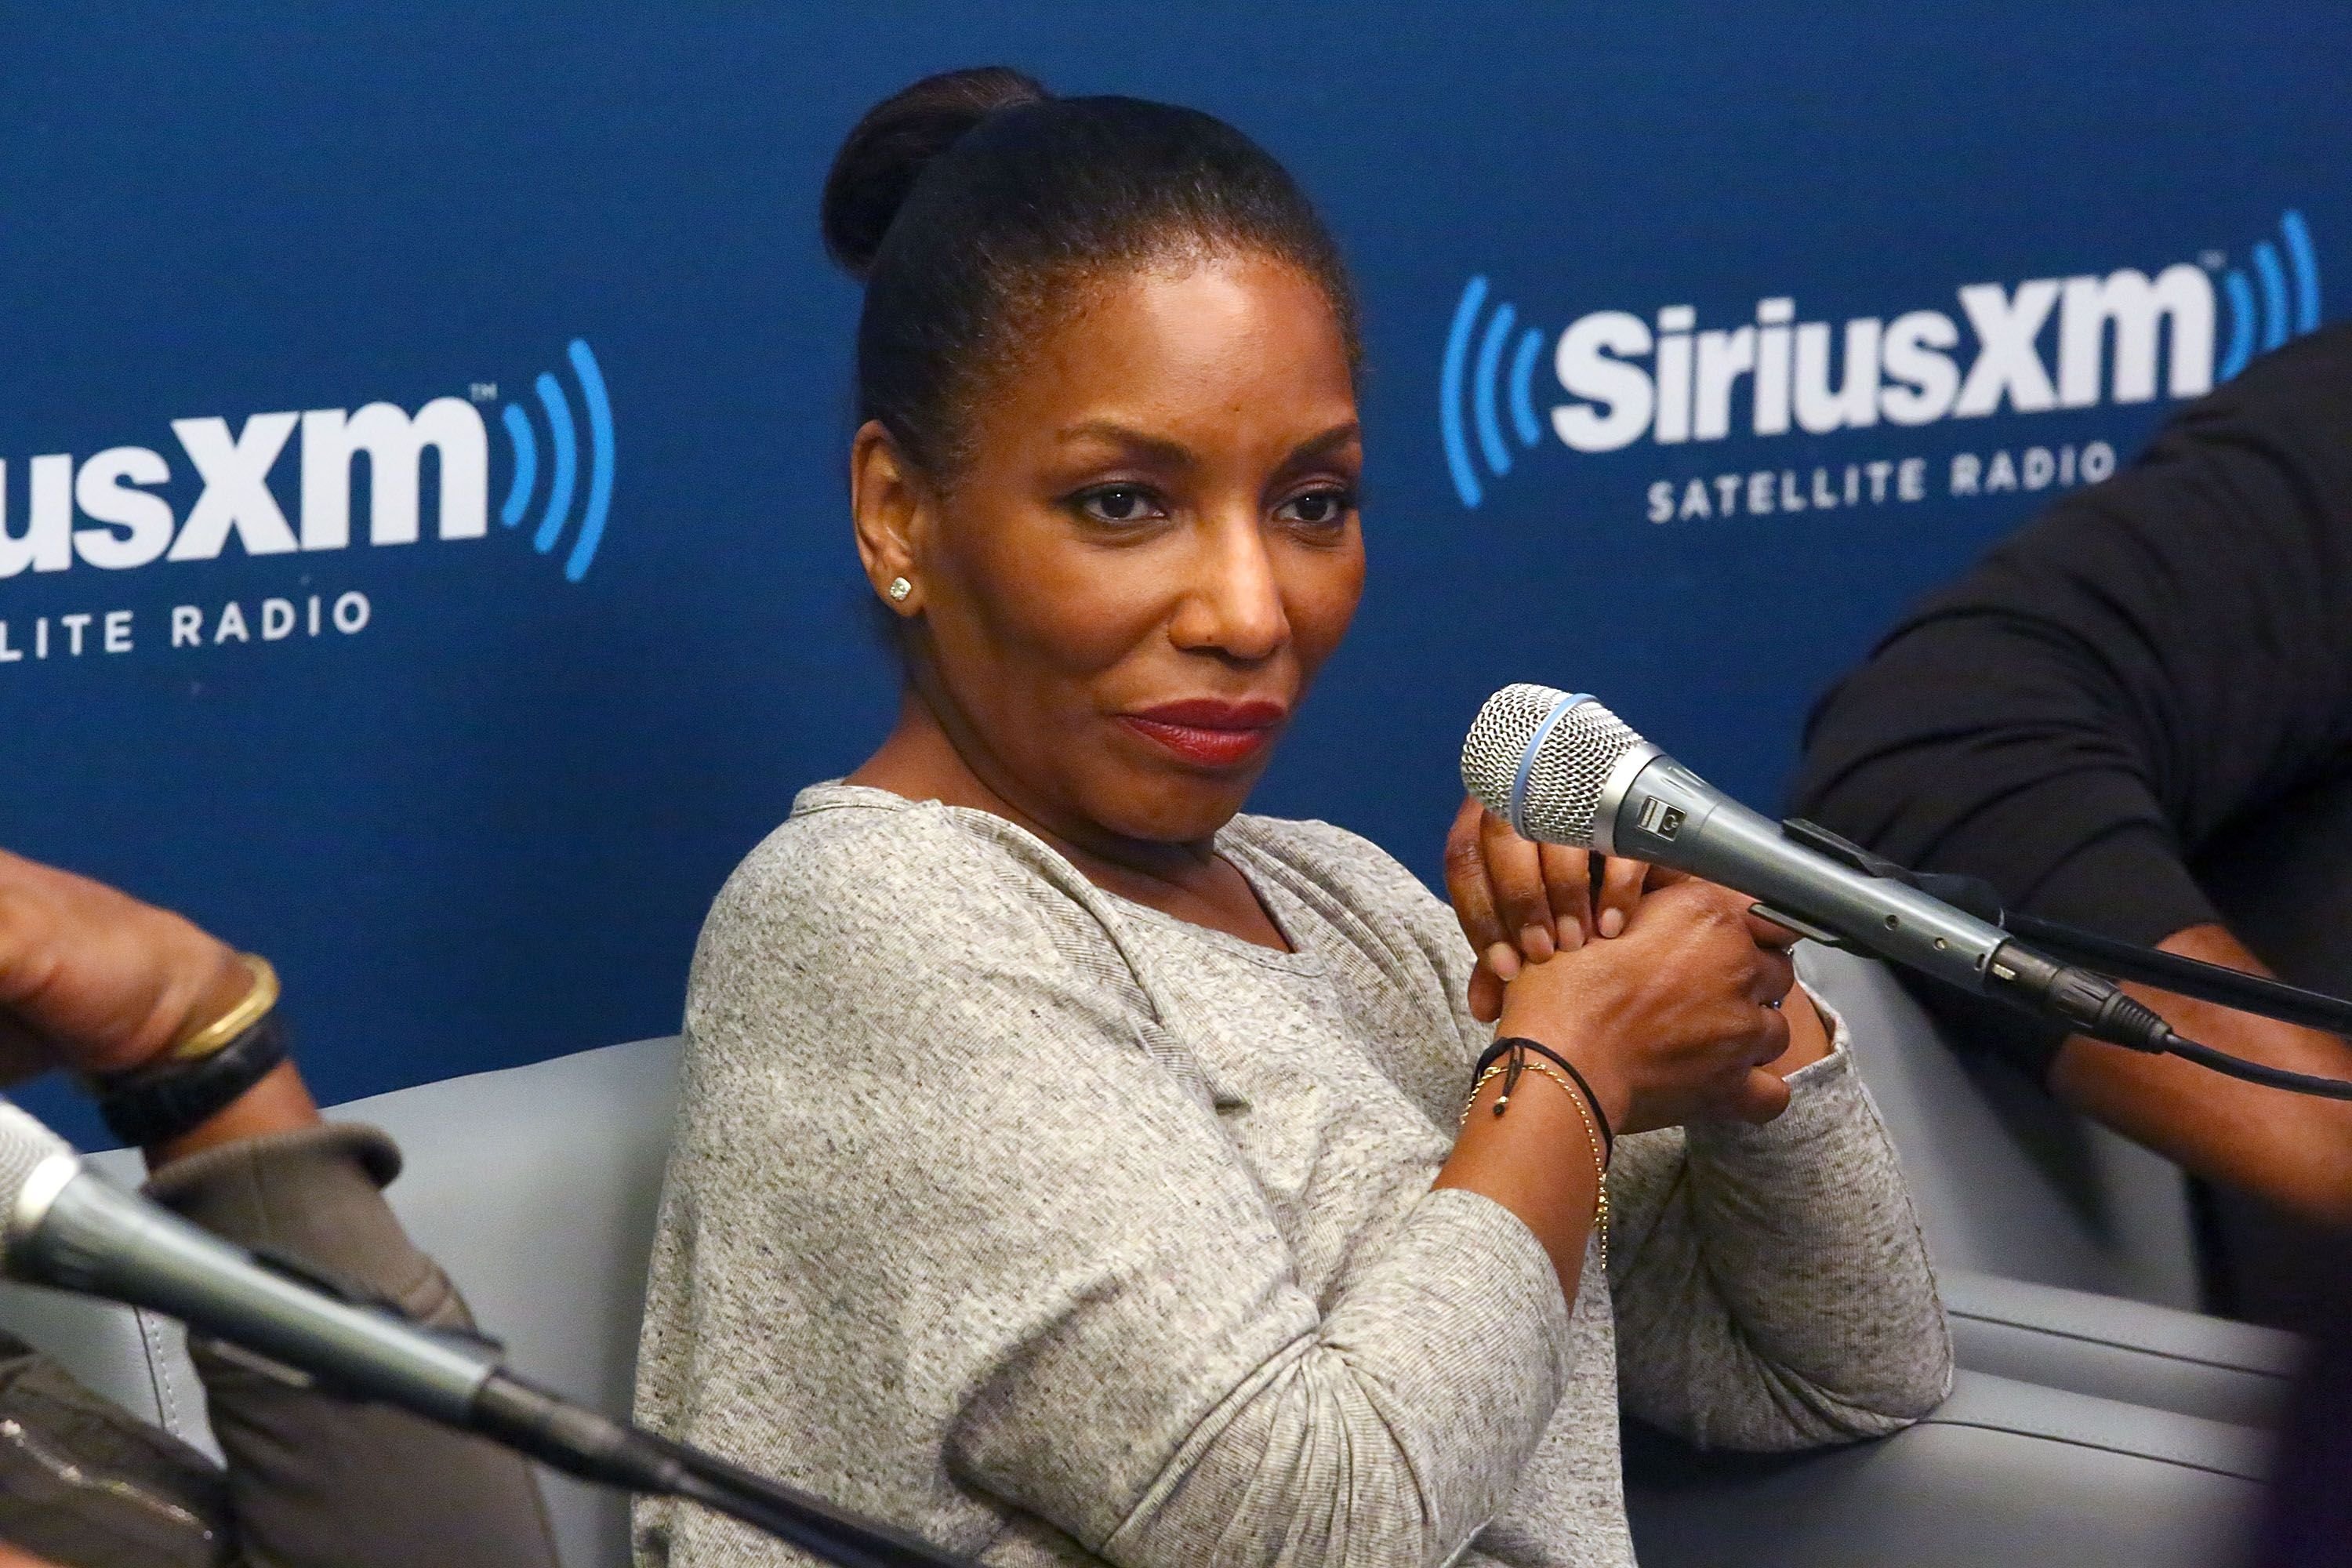 Actress Stephanie Mills attends SiriusXM's Town Hall with the cast of 'The Wiz' hosted by Radio Andy host Bevy Smith at the SiriusXM Studios on October 26, 2015 | Photo: Getty Images